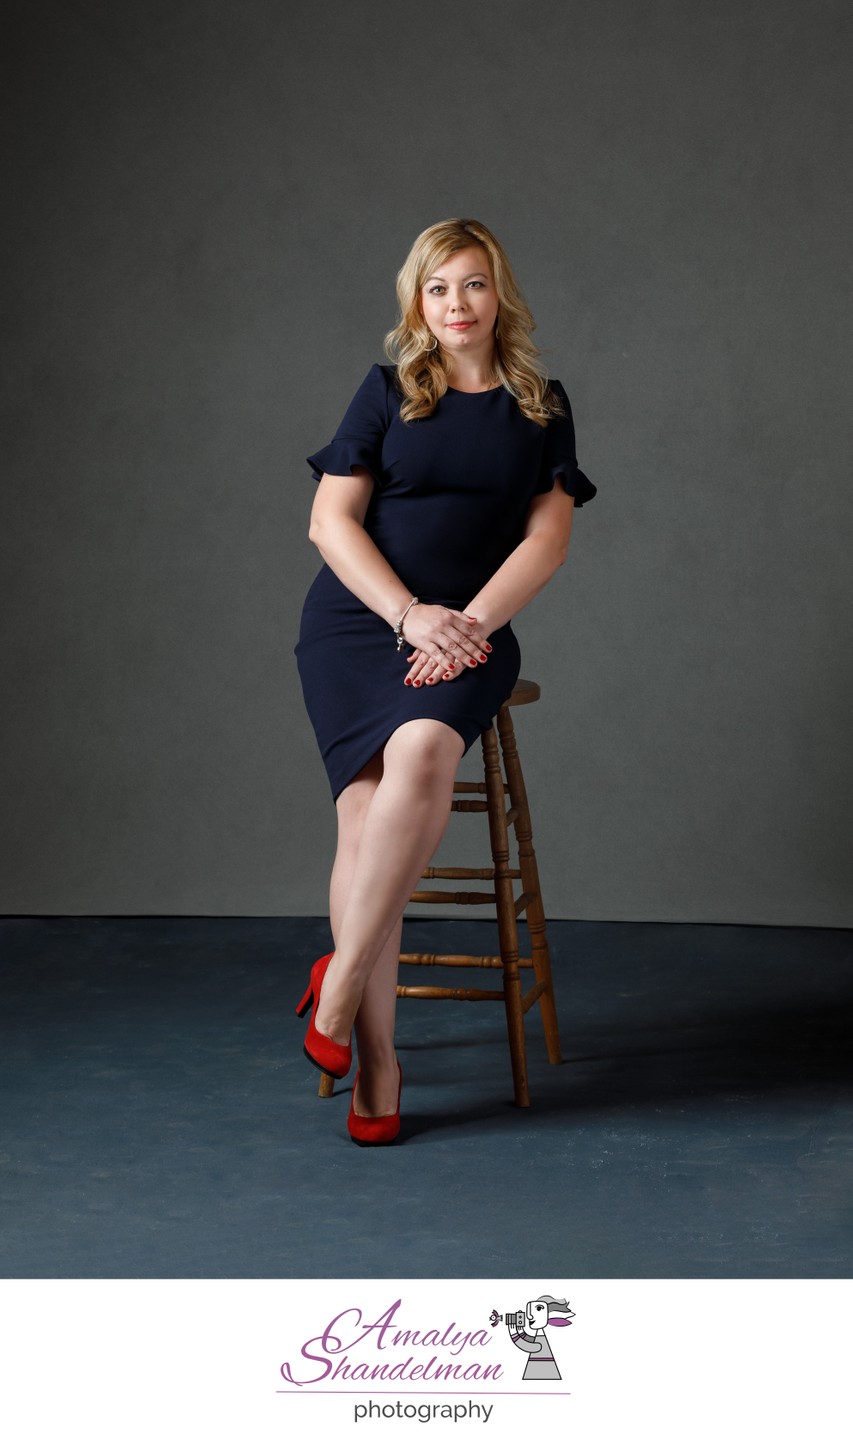 Beautiful Female Business Portrait: A Guide to Elegant Photoshoot